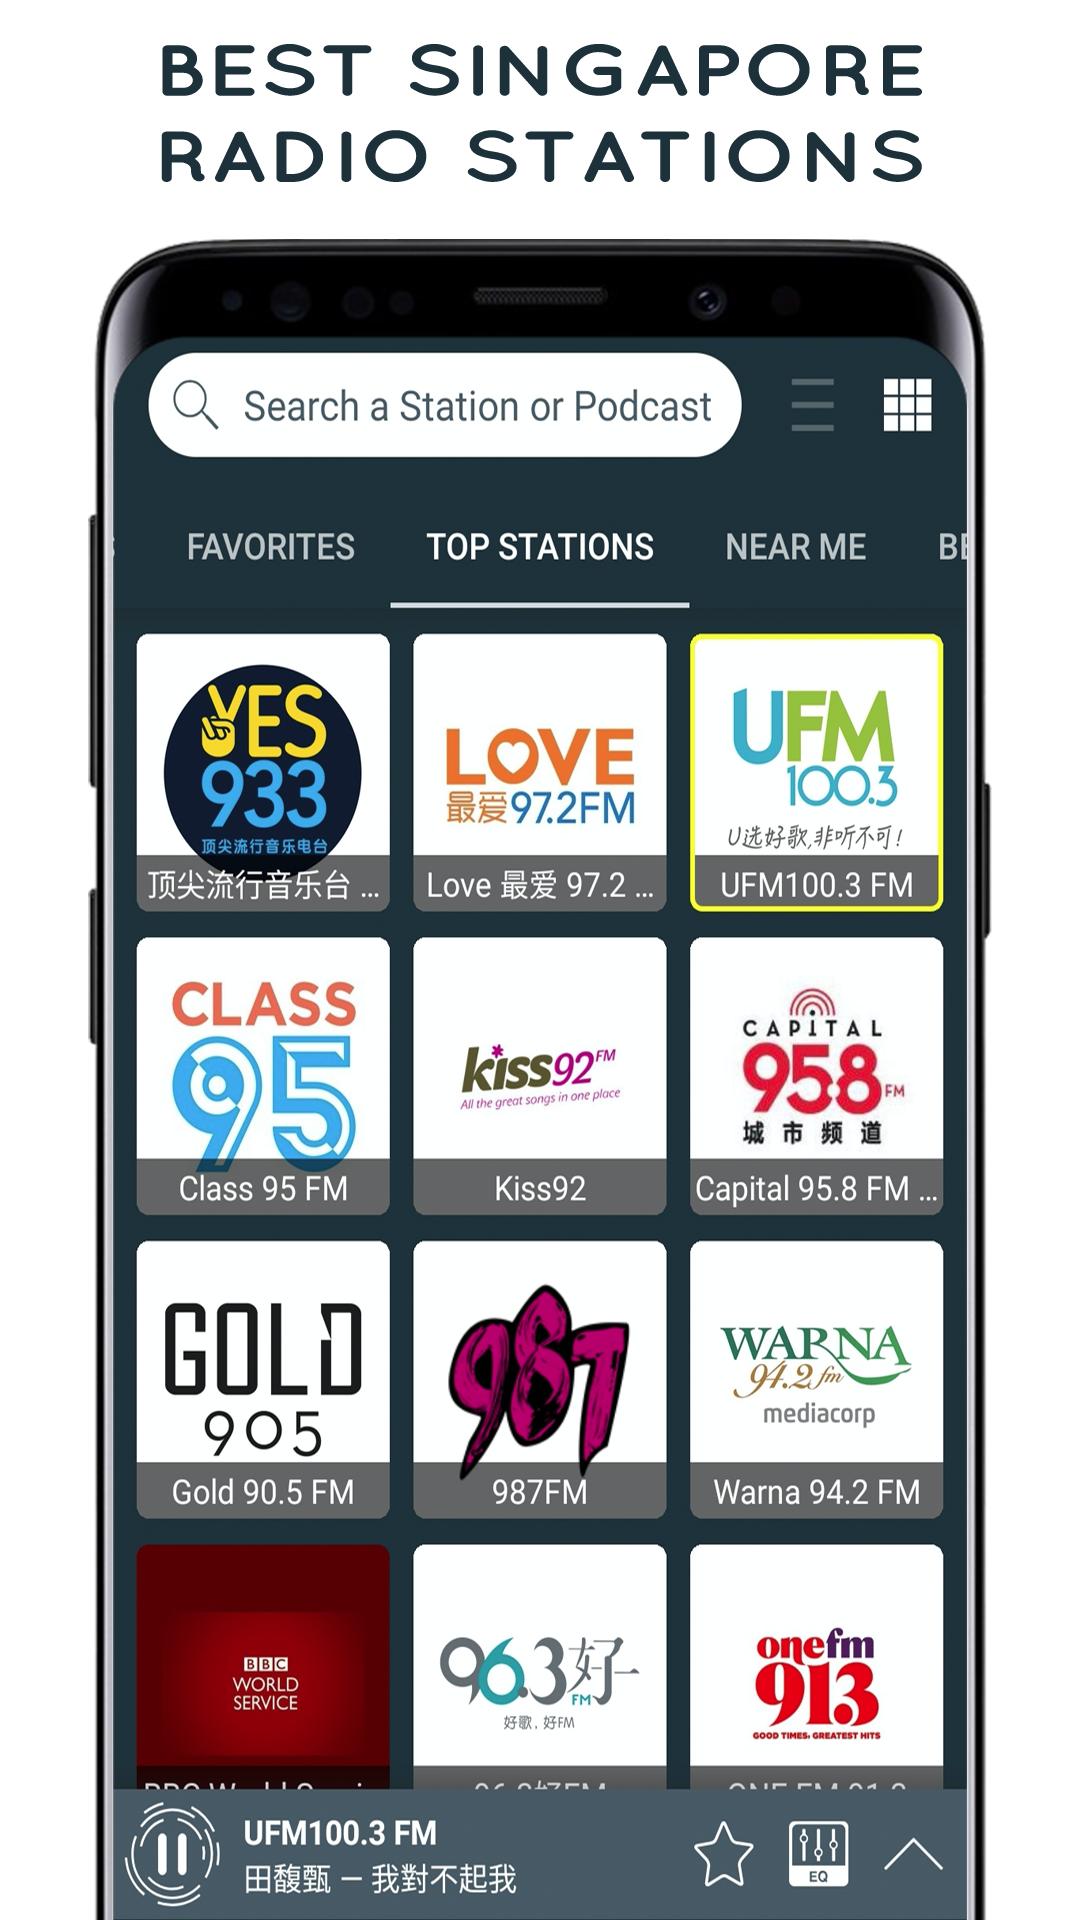 Radio Singapore for Android - APK Download